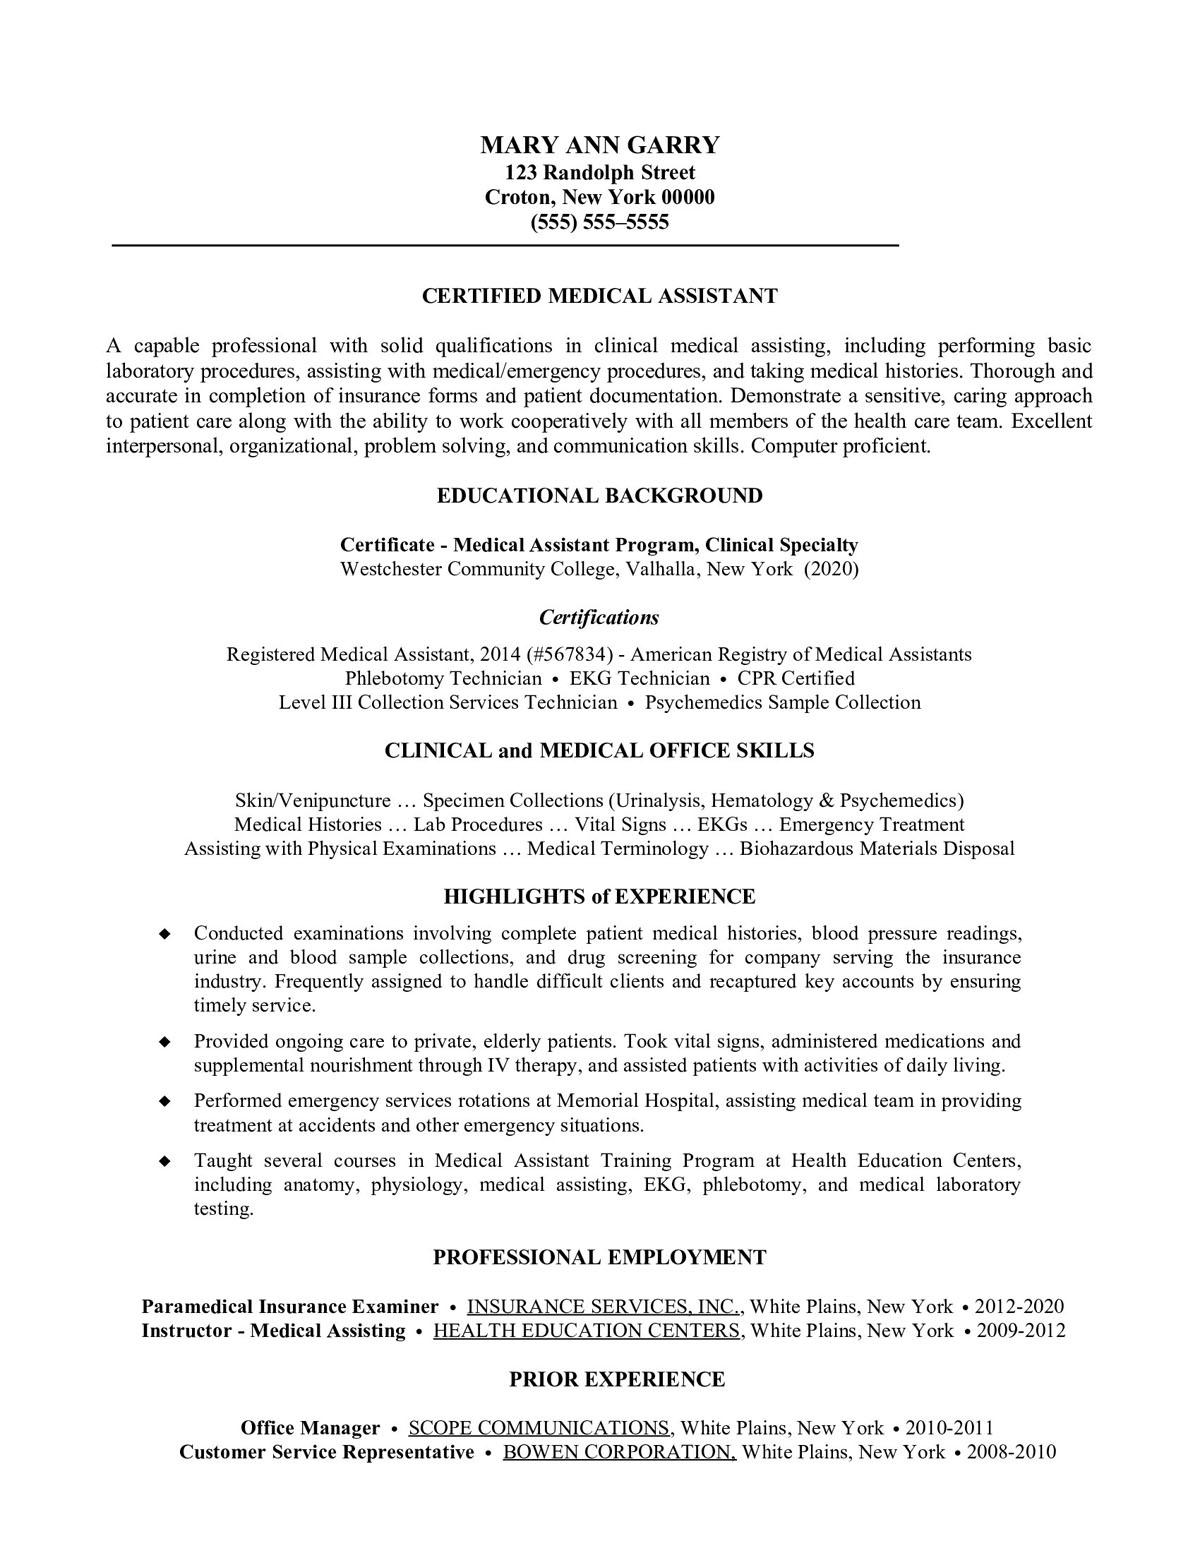 Sample resume: Health Care Providers, High Experience, Functional